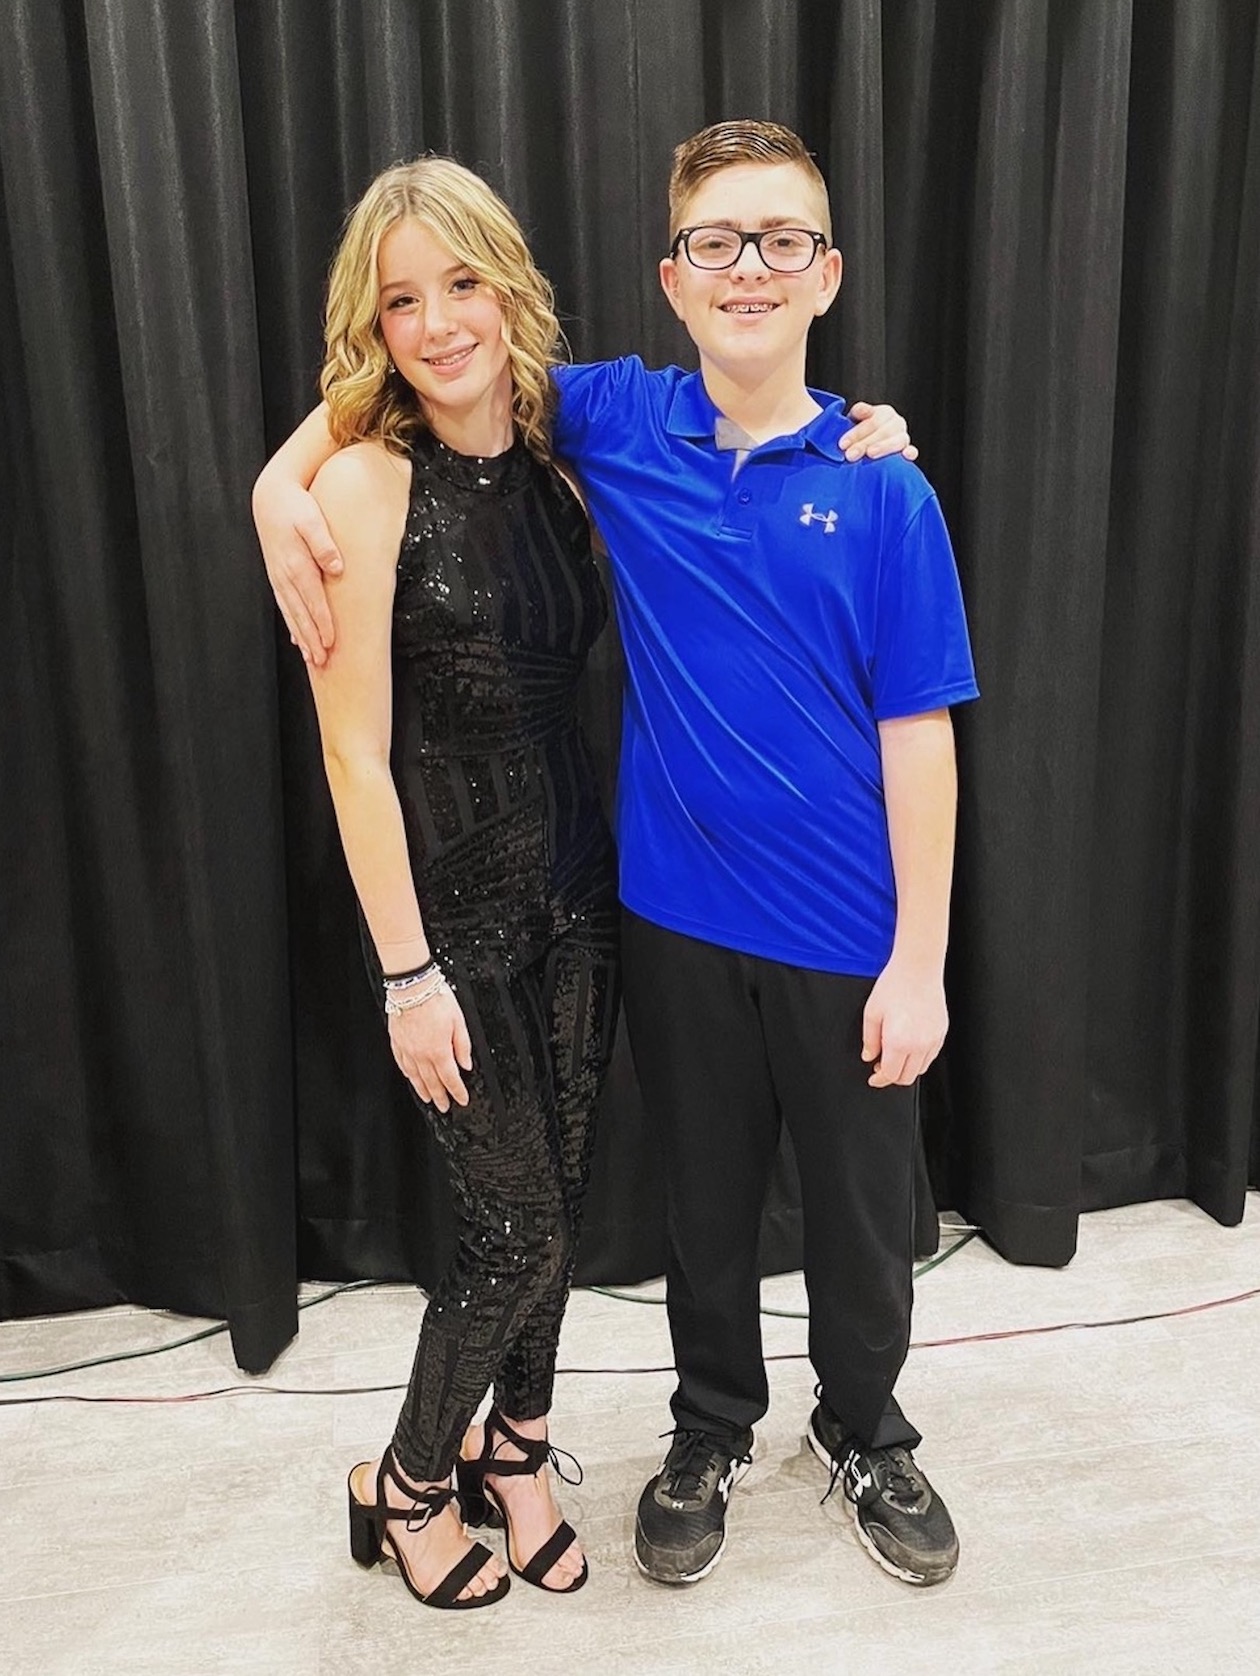 Makenna Quarantillo performed a benefit concert for Limbs of Life in honor of her classmate, Gavin Burns. (Images courtesy of Kristy Quarantillo)